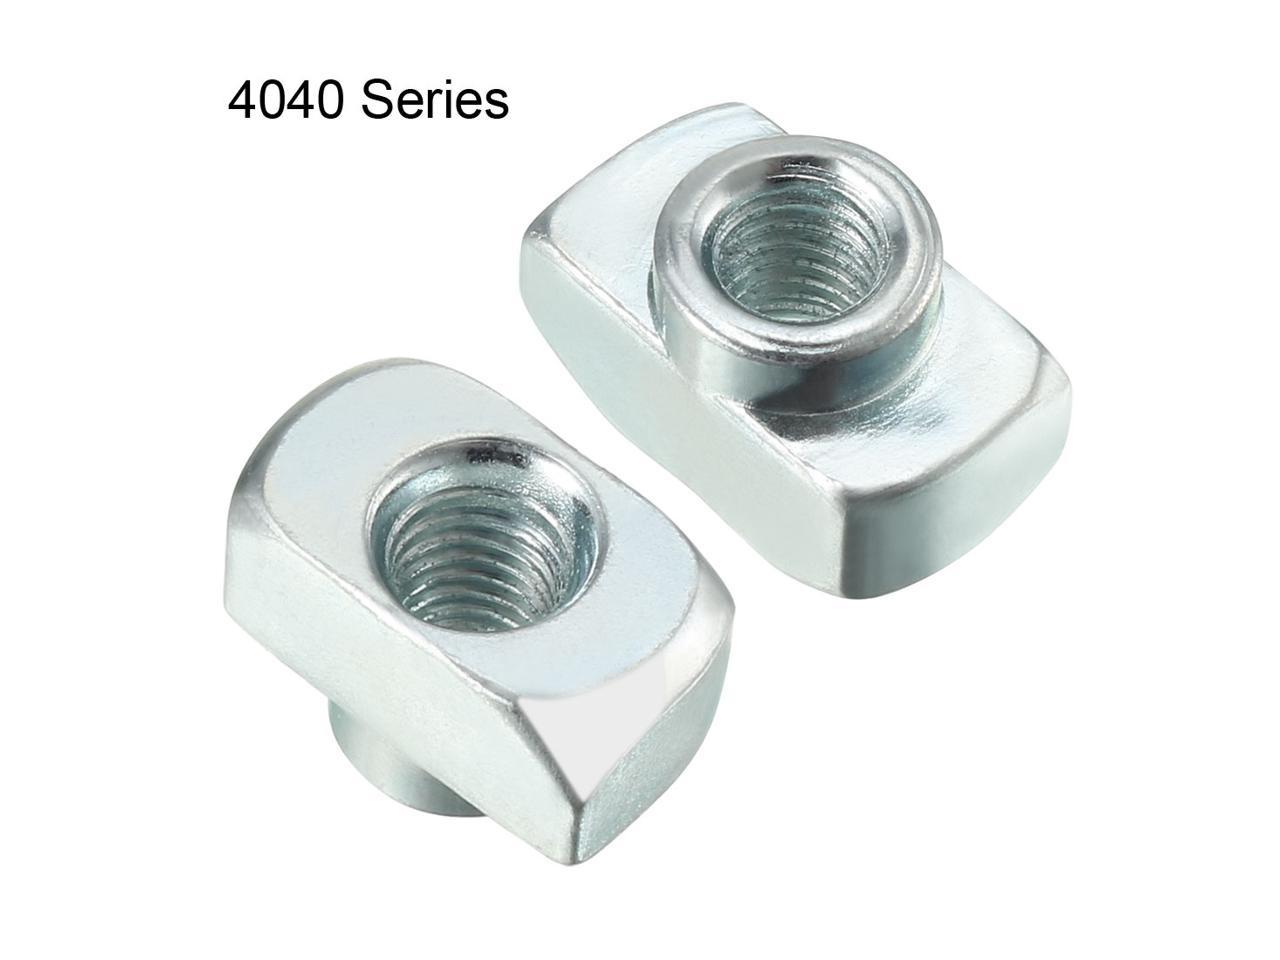 Pack of 20 M6 Female Thread for 4040 Series Aluminium Extrusion Profile ZCHXD Sliding T Slot Nuts